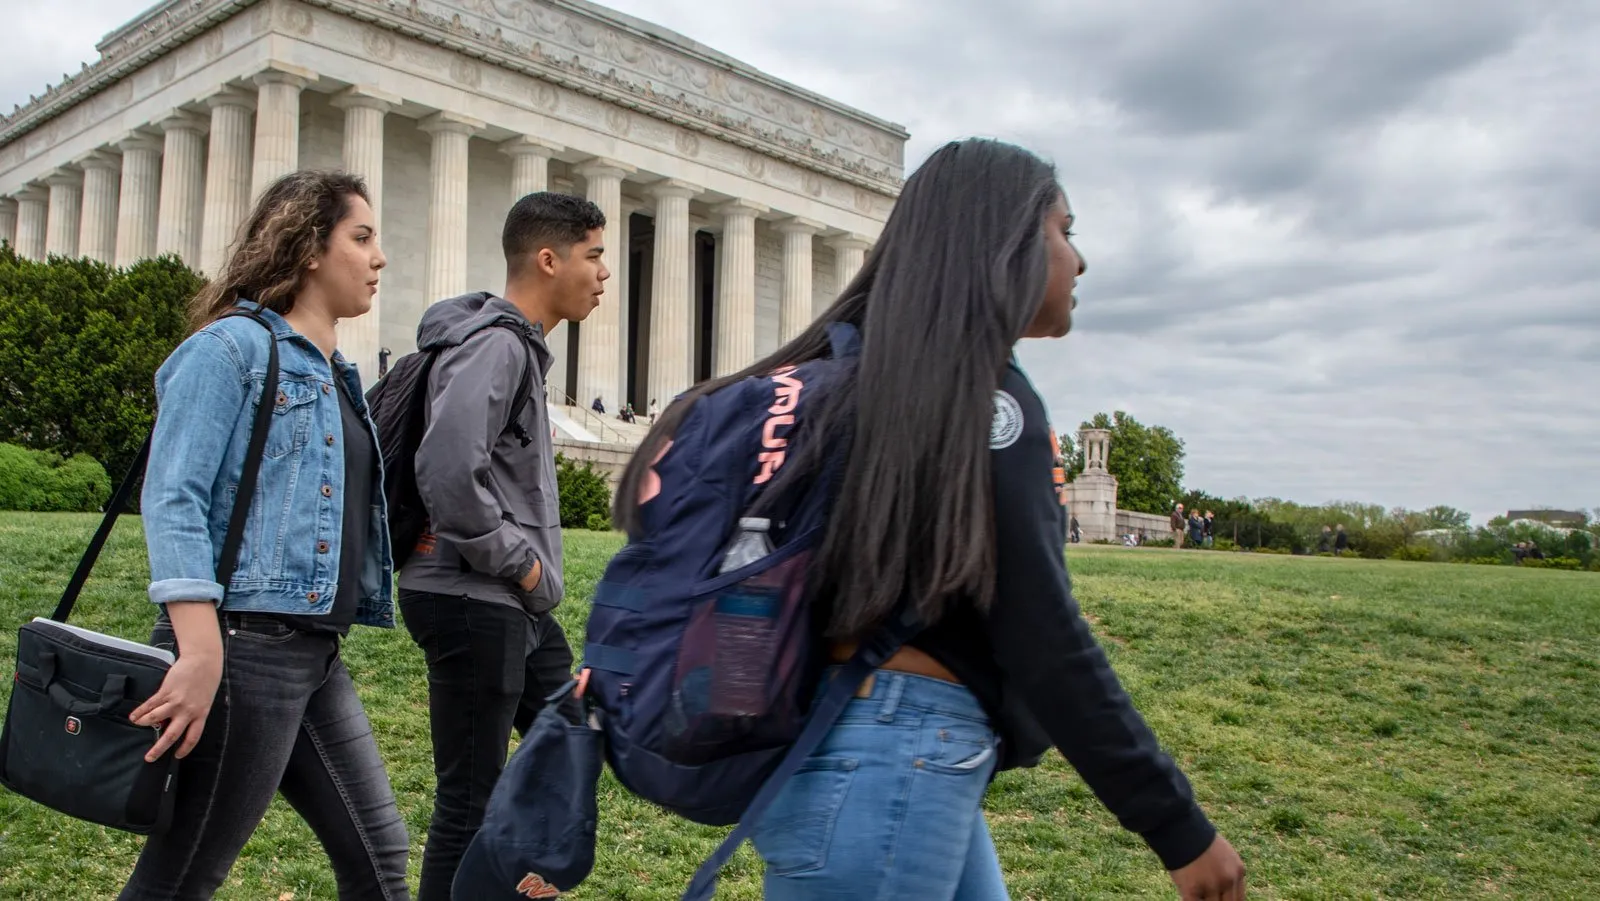 Students walking by the Lincoln Memorial